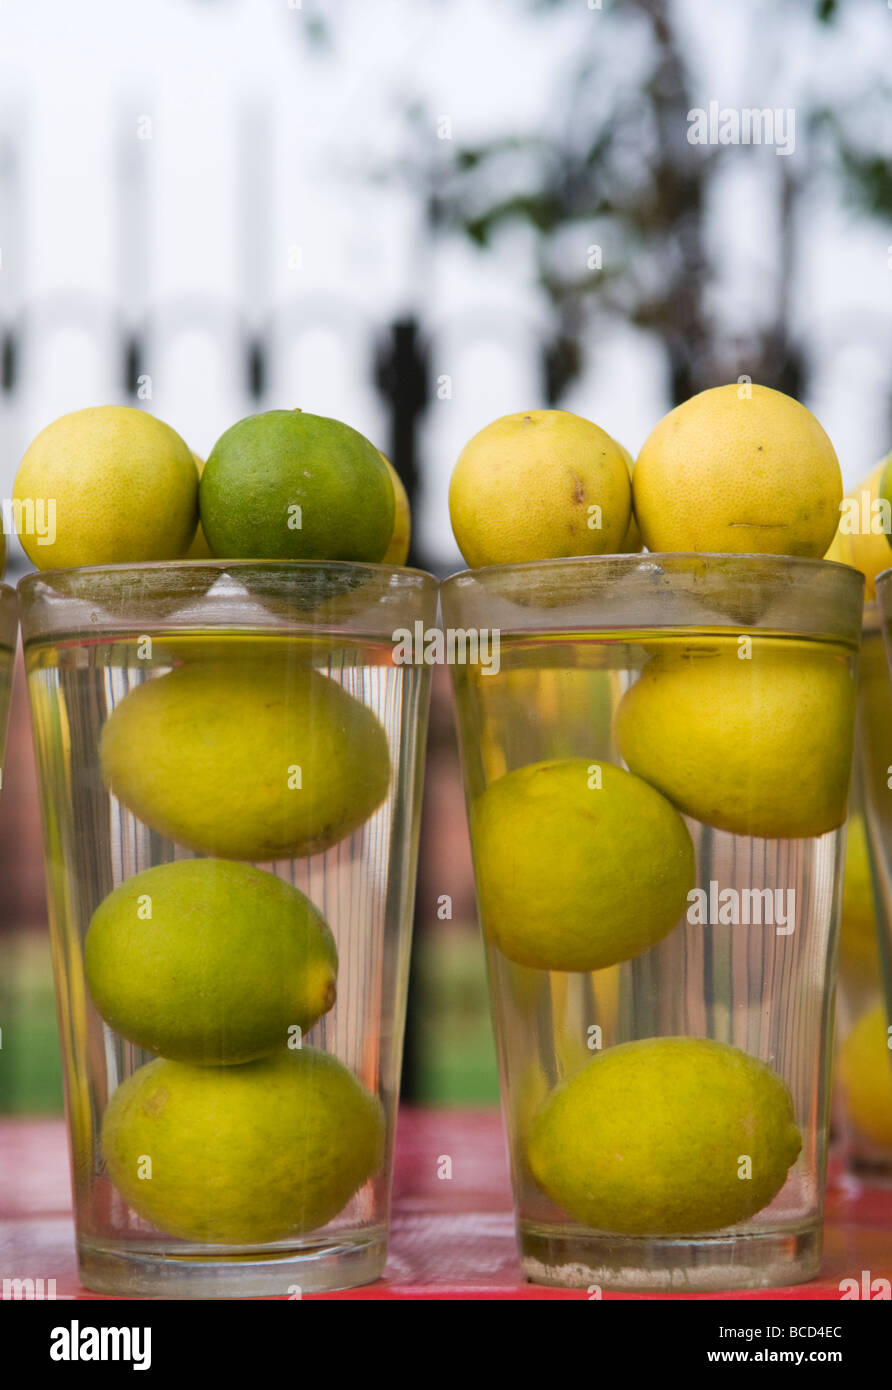 Glasses of fresh lime juice for sale at a street vendor in New Delhi India Stock Photo